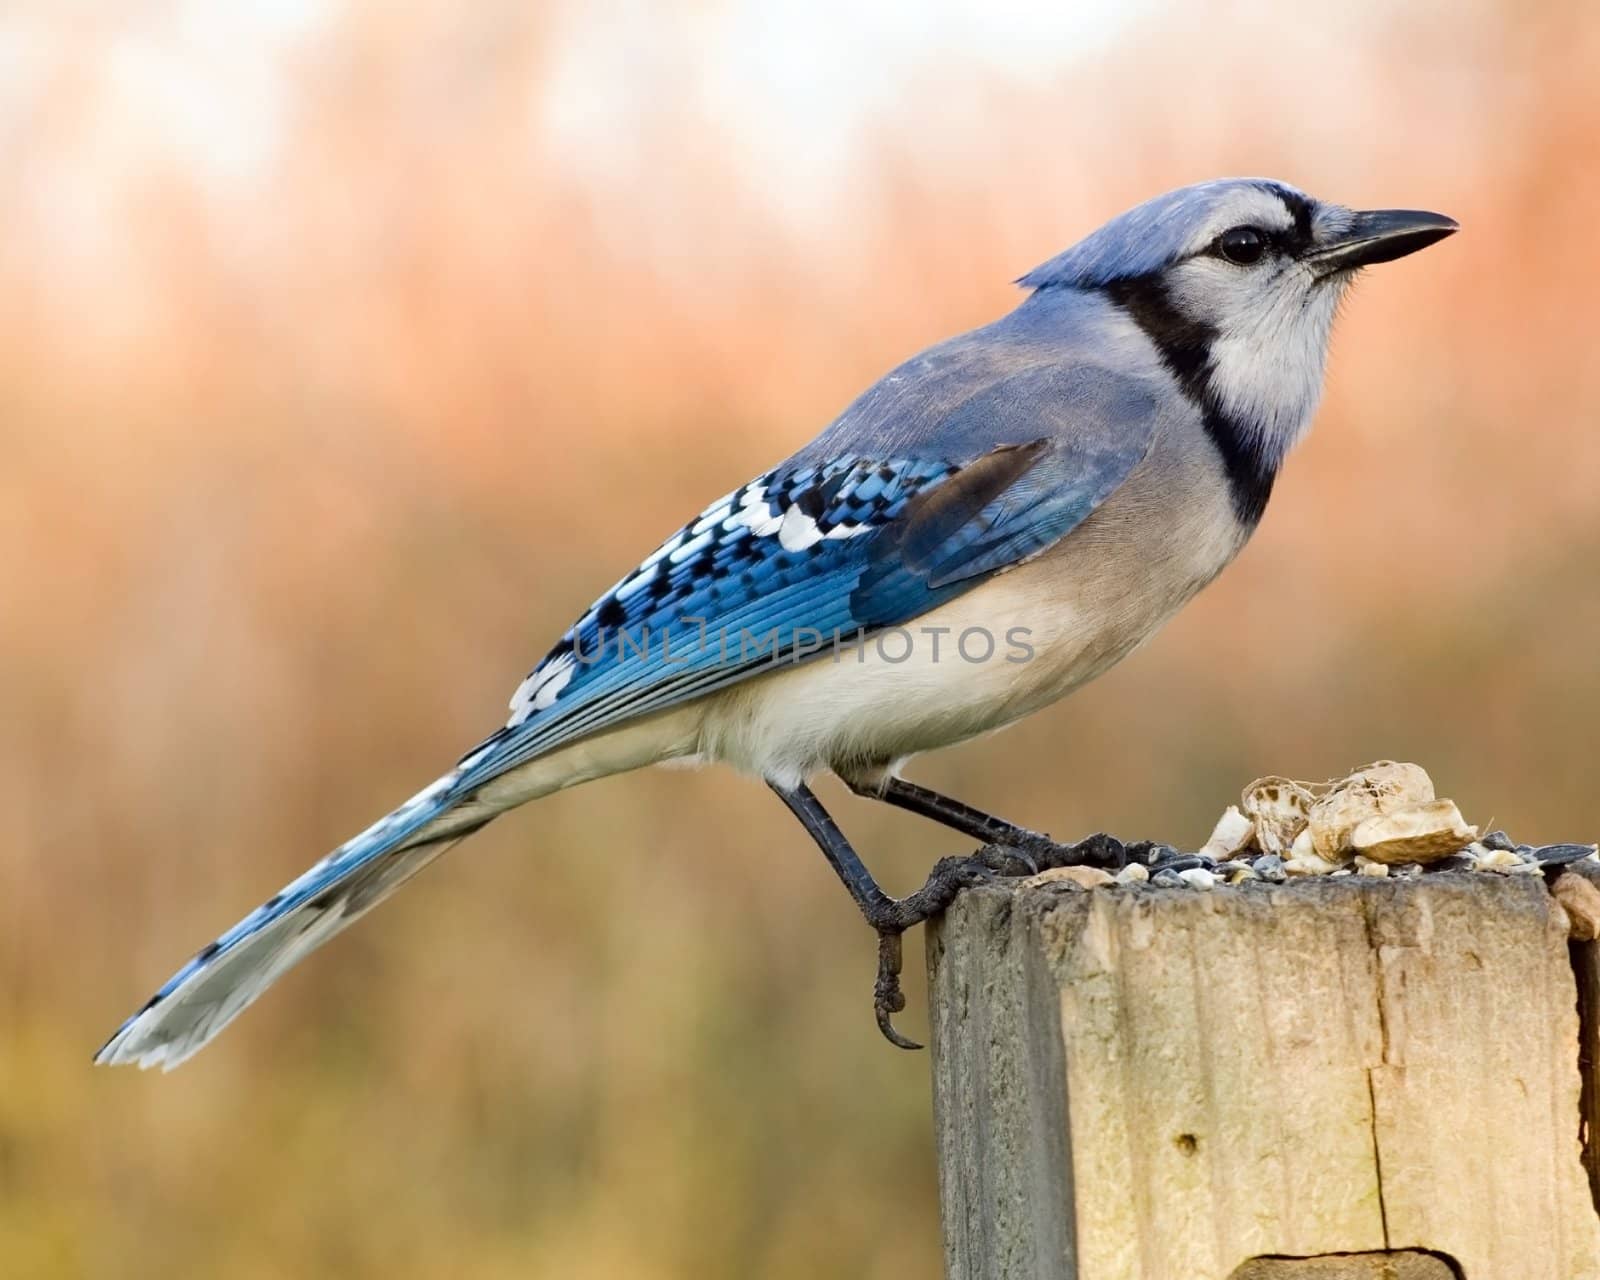 A blue jay perched on a wooden post.